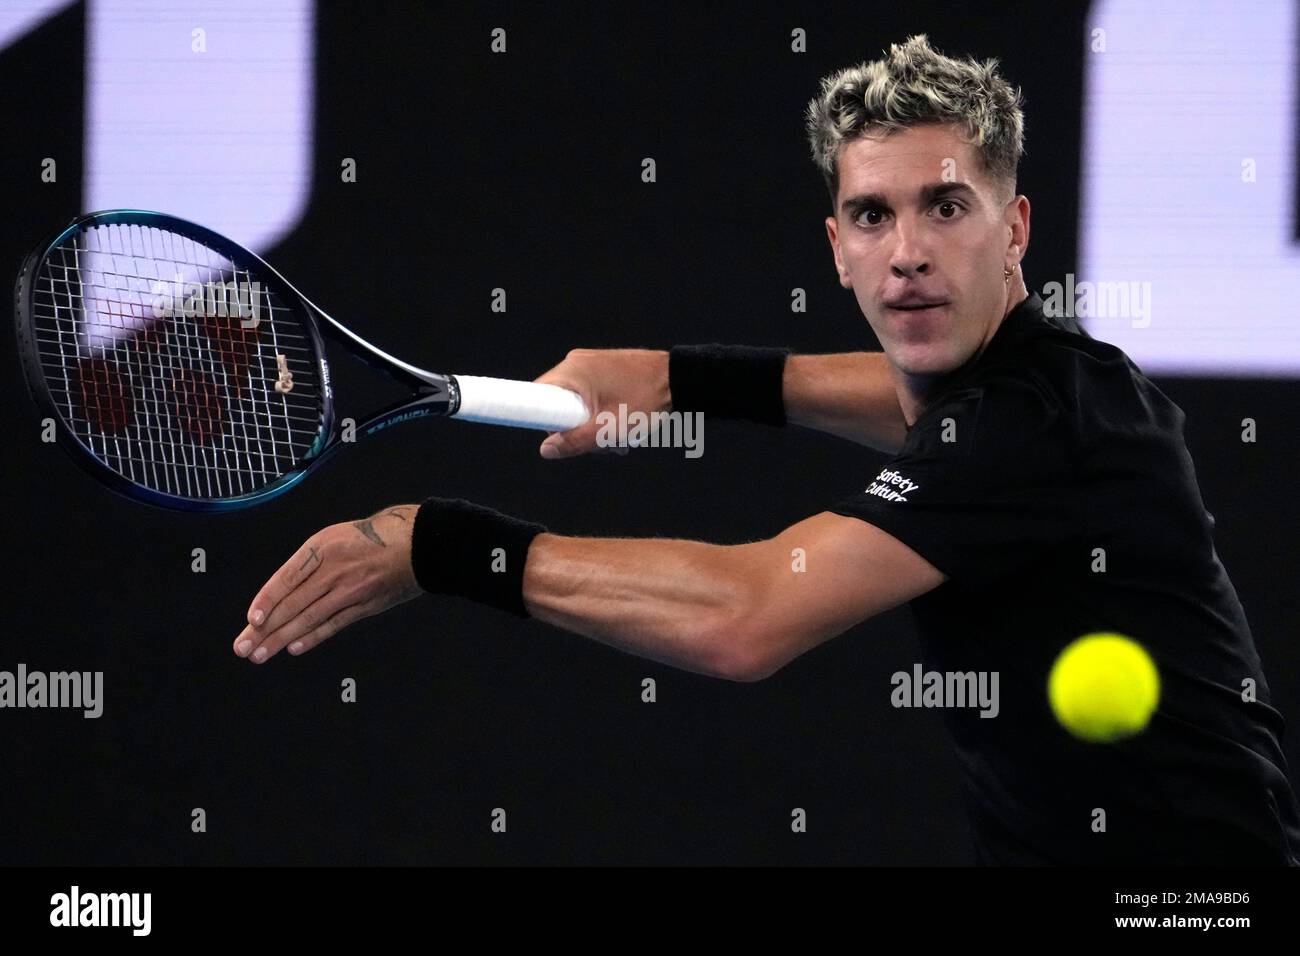 Thanasi Kokkinakis of Australia plays a forehand return to Andy Murray of Britain during their second round match at the Australian Open tennis championship in Melbourne, Australia, Thursday, Jan